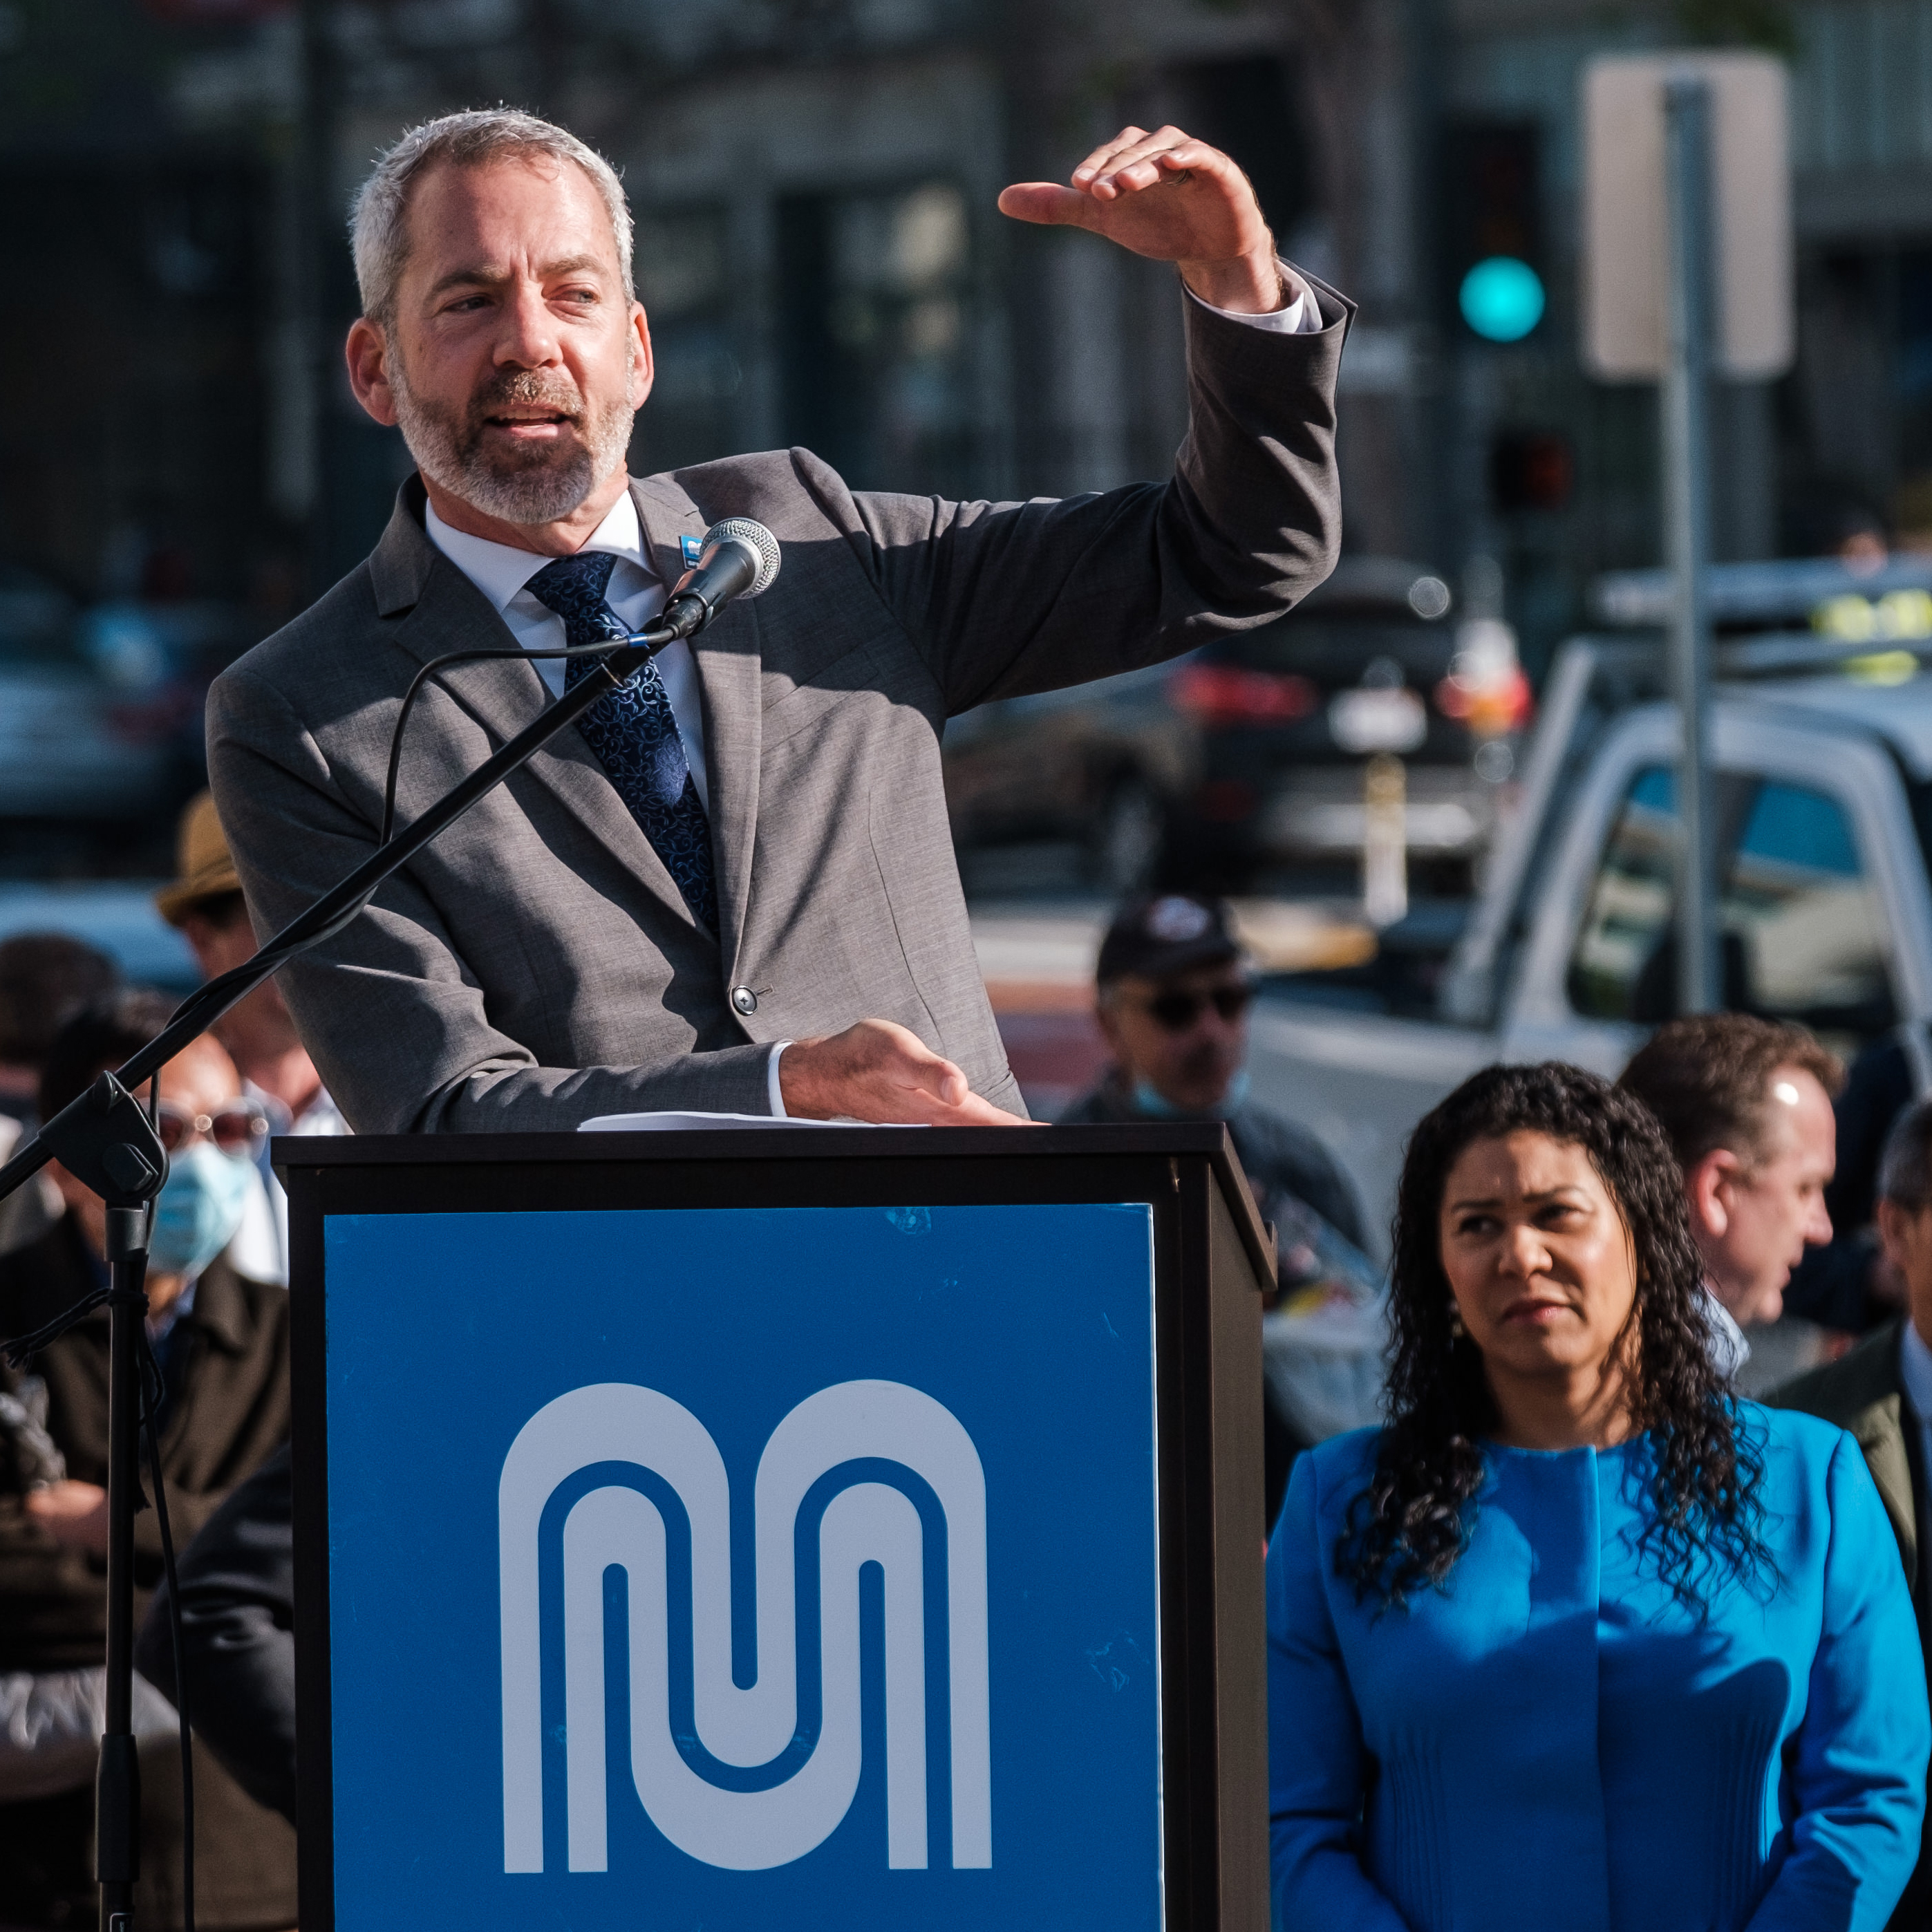 Jeffrey Tumlin the San Francisco Director of Transportation raises his arm while giving a presentation with mayor london breed in the background.